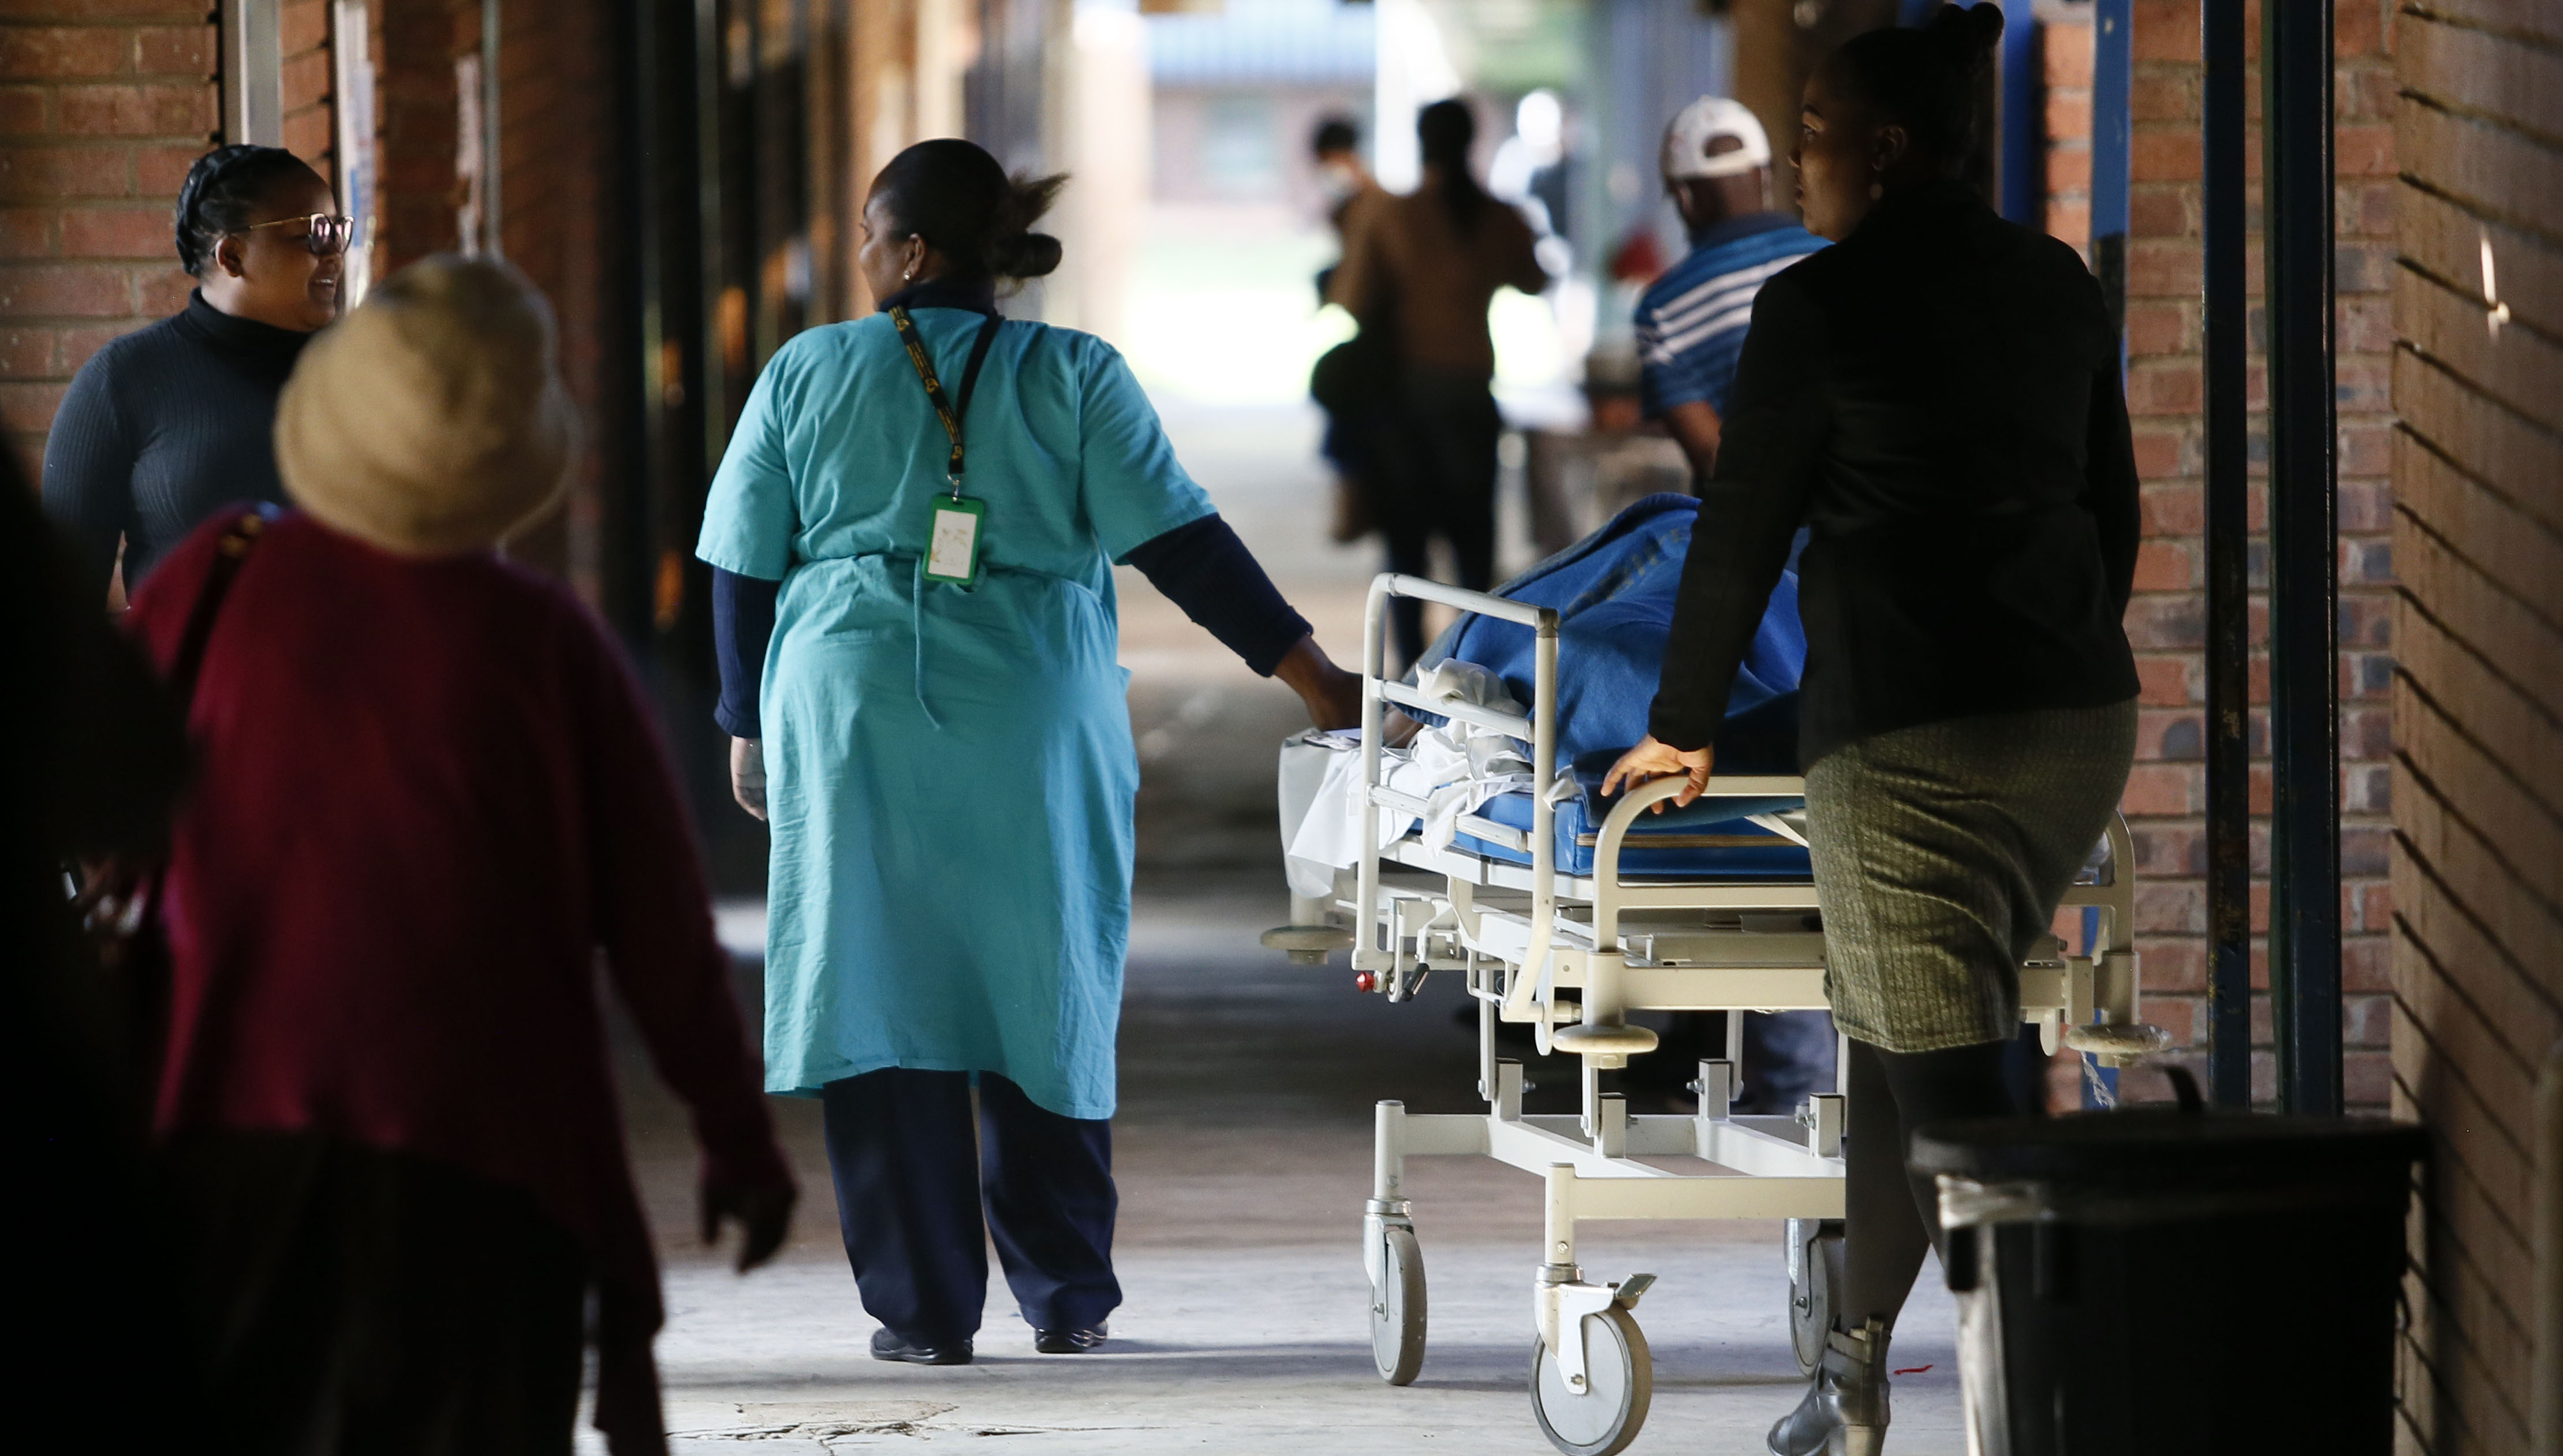 A cholera outbreak in South Africa has lead to the death of 15 people in Hammanskraal.